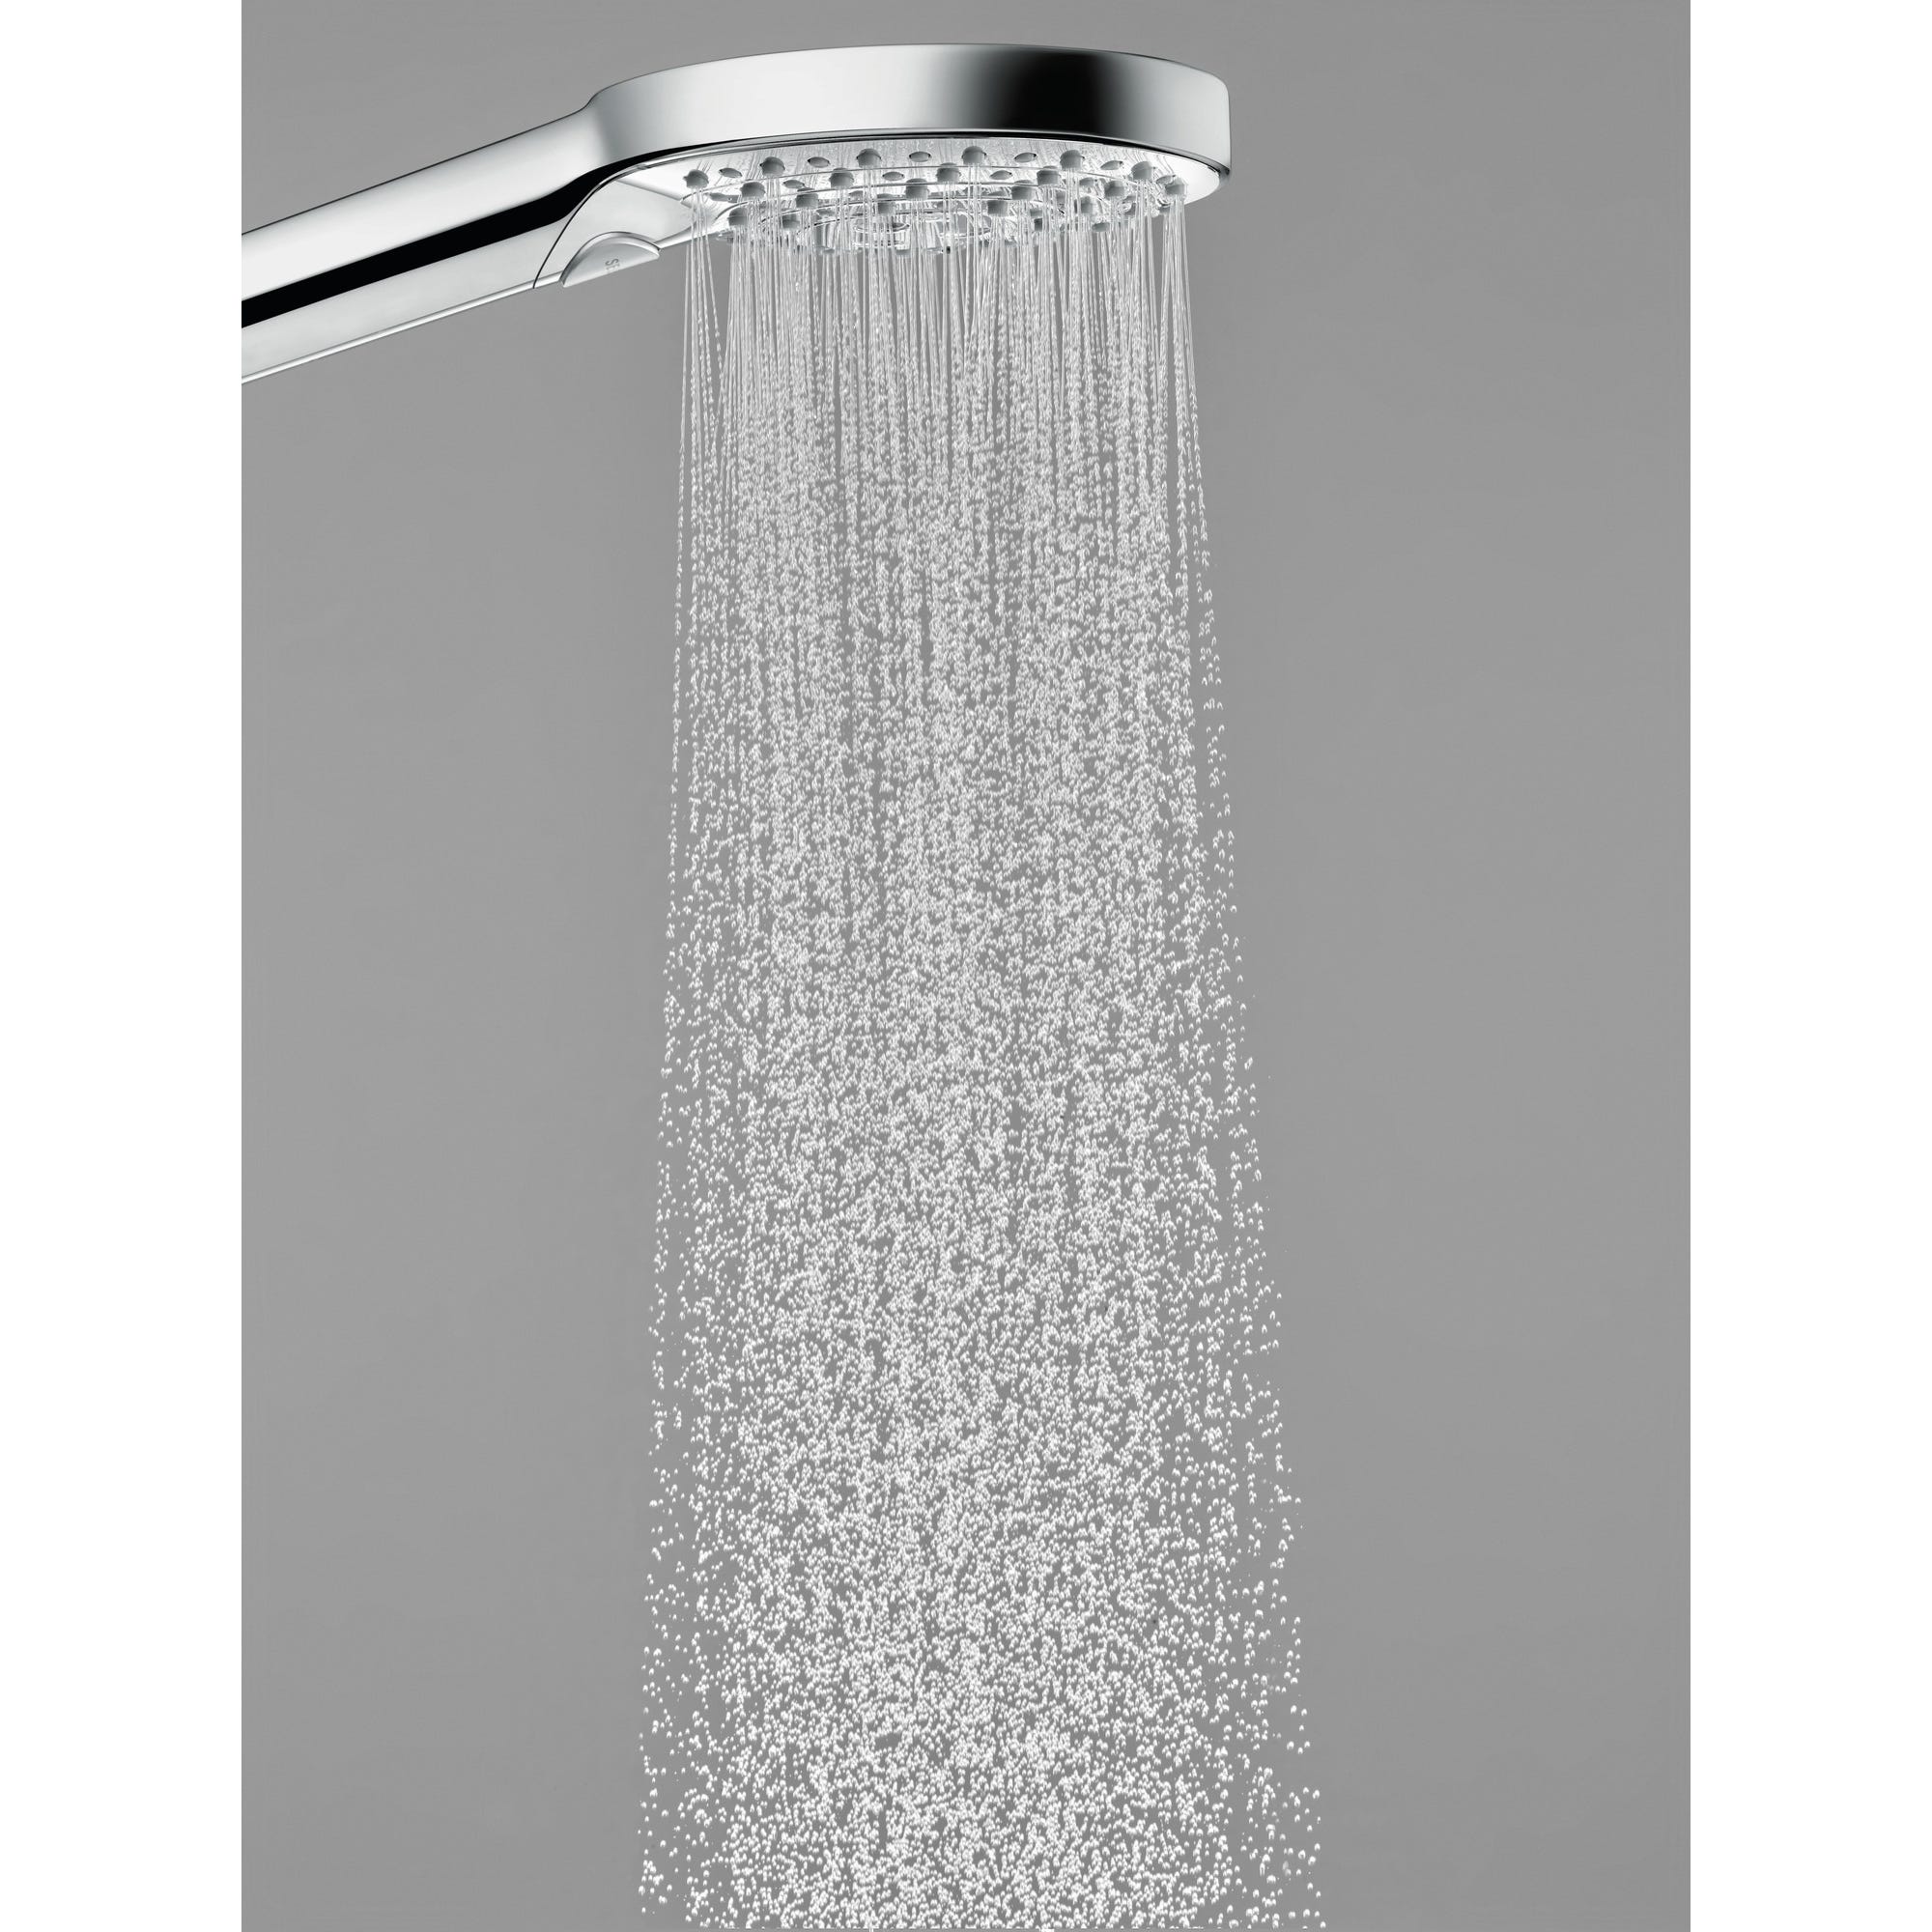 Douchette 3 jets  SELECT S 120 - 26014000 HANSGROHE 1